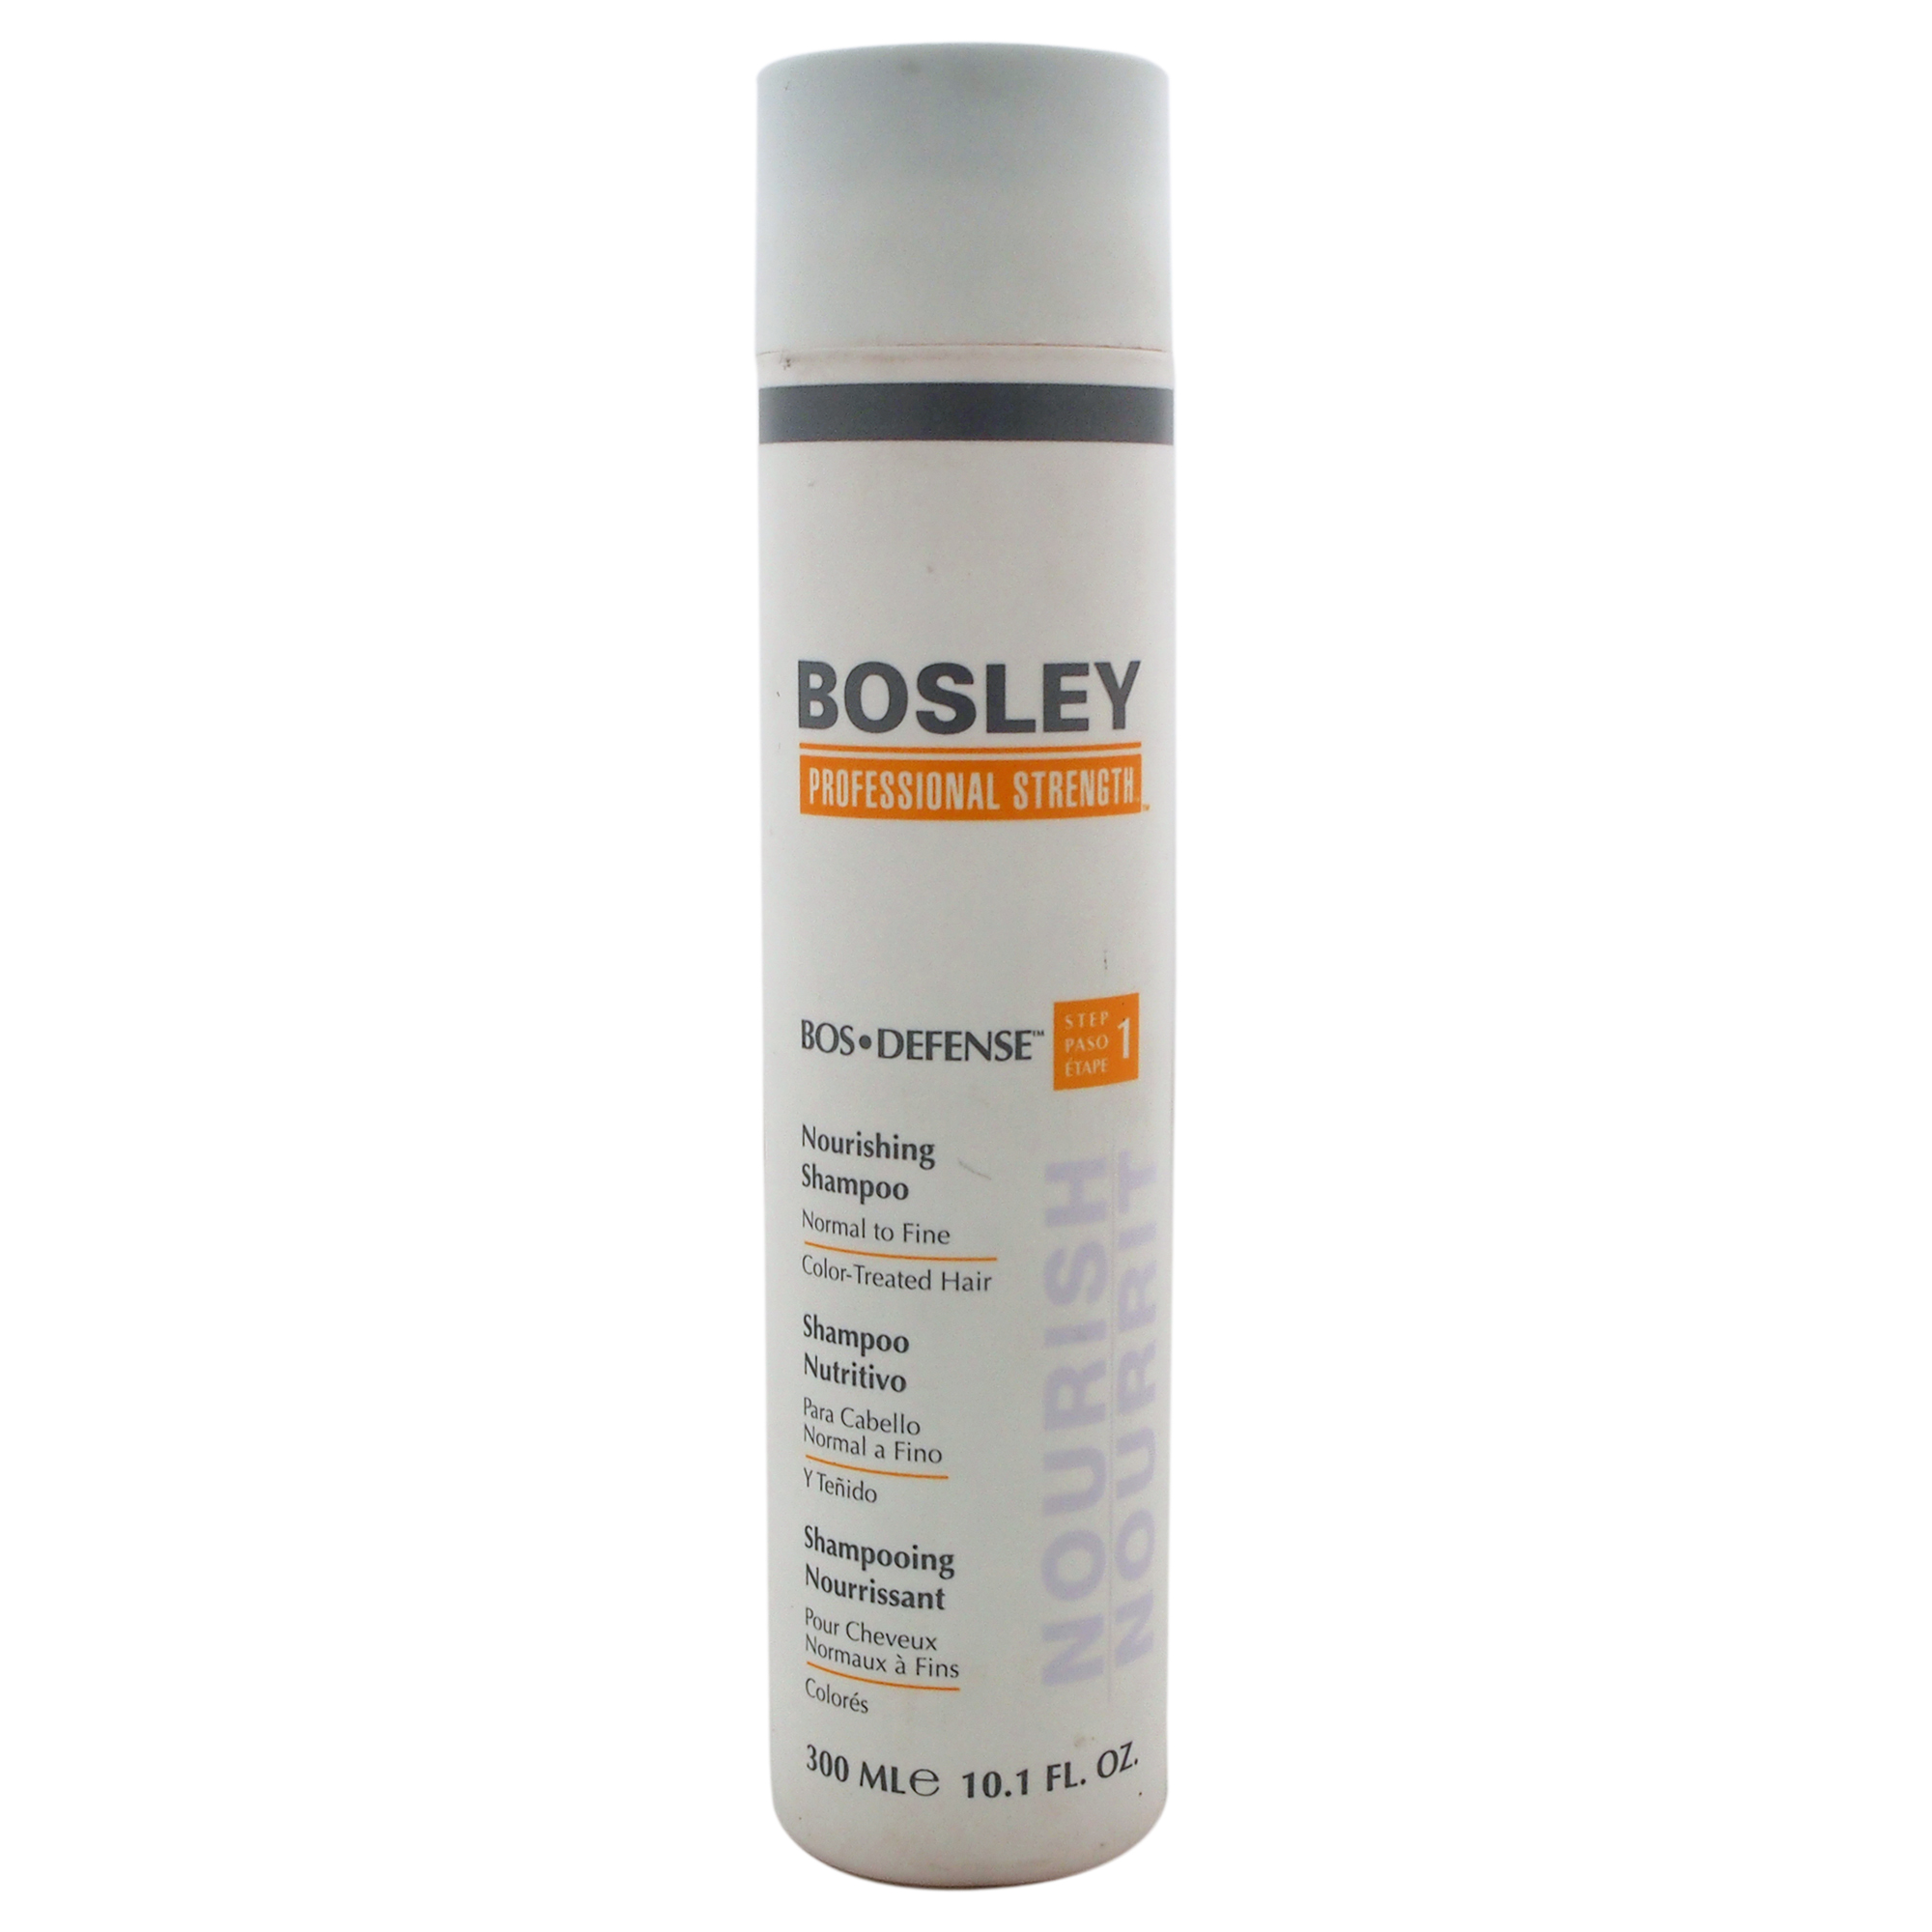 BOSLEY Bos-Defense Nourishing Shampoo for Normal To Fine Color-Treated Hair